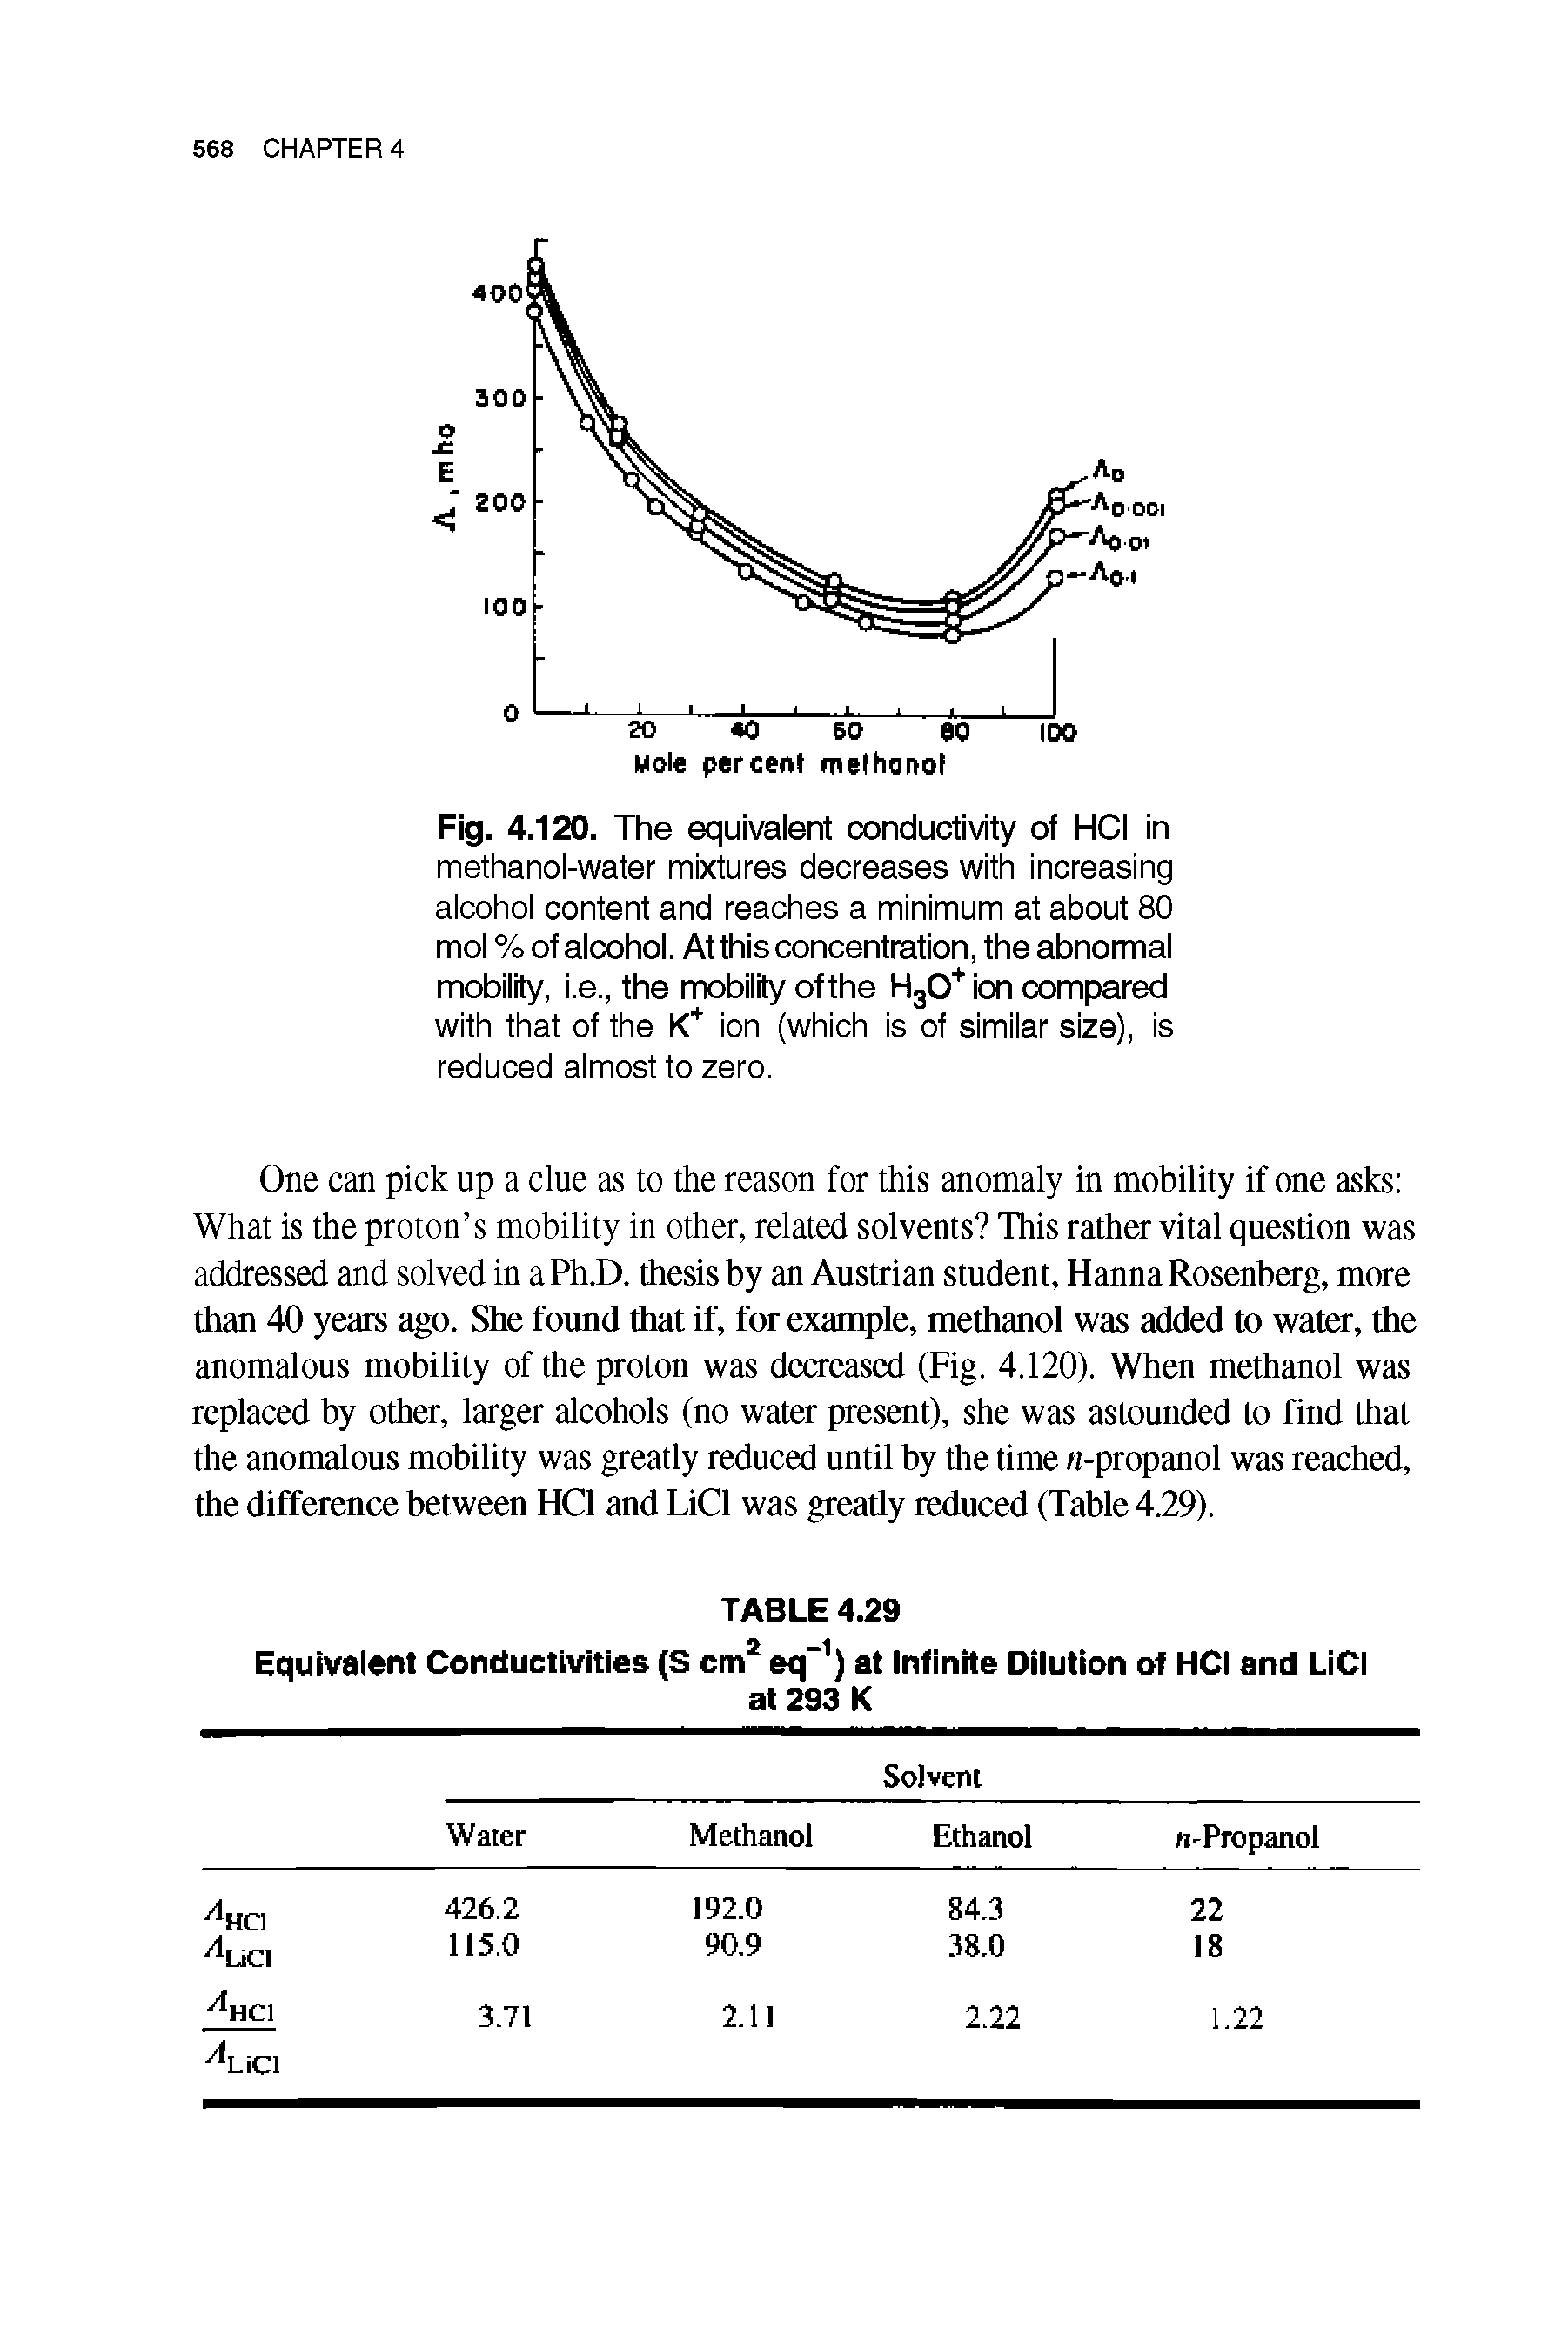 Fig. 4.120. The equivalent conductivity of HCI in methanol-water mixtures decreases with increasing alcohol content and reaches a minimum at about 80 mol % of alcohol. At this concentration, the abnormal mobility, i.e., the mobility of the HgO ion compared with that of the K ion (which is of similar size), is reduced almost to zero.